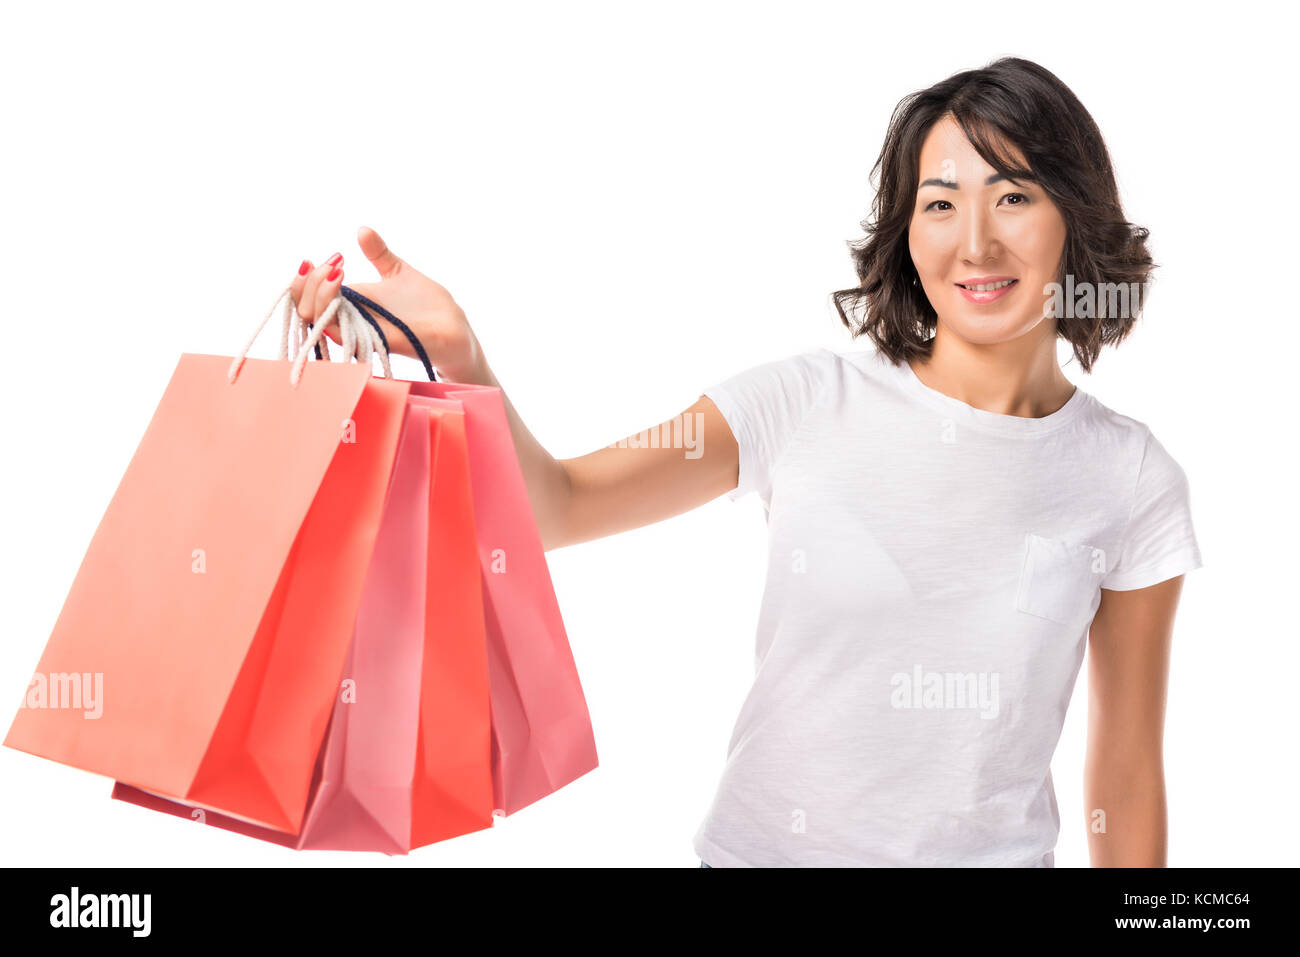 Woman with shopping bags Banque D'Images